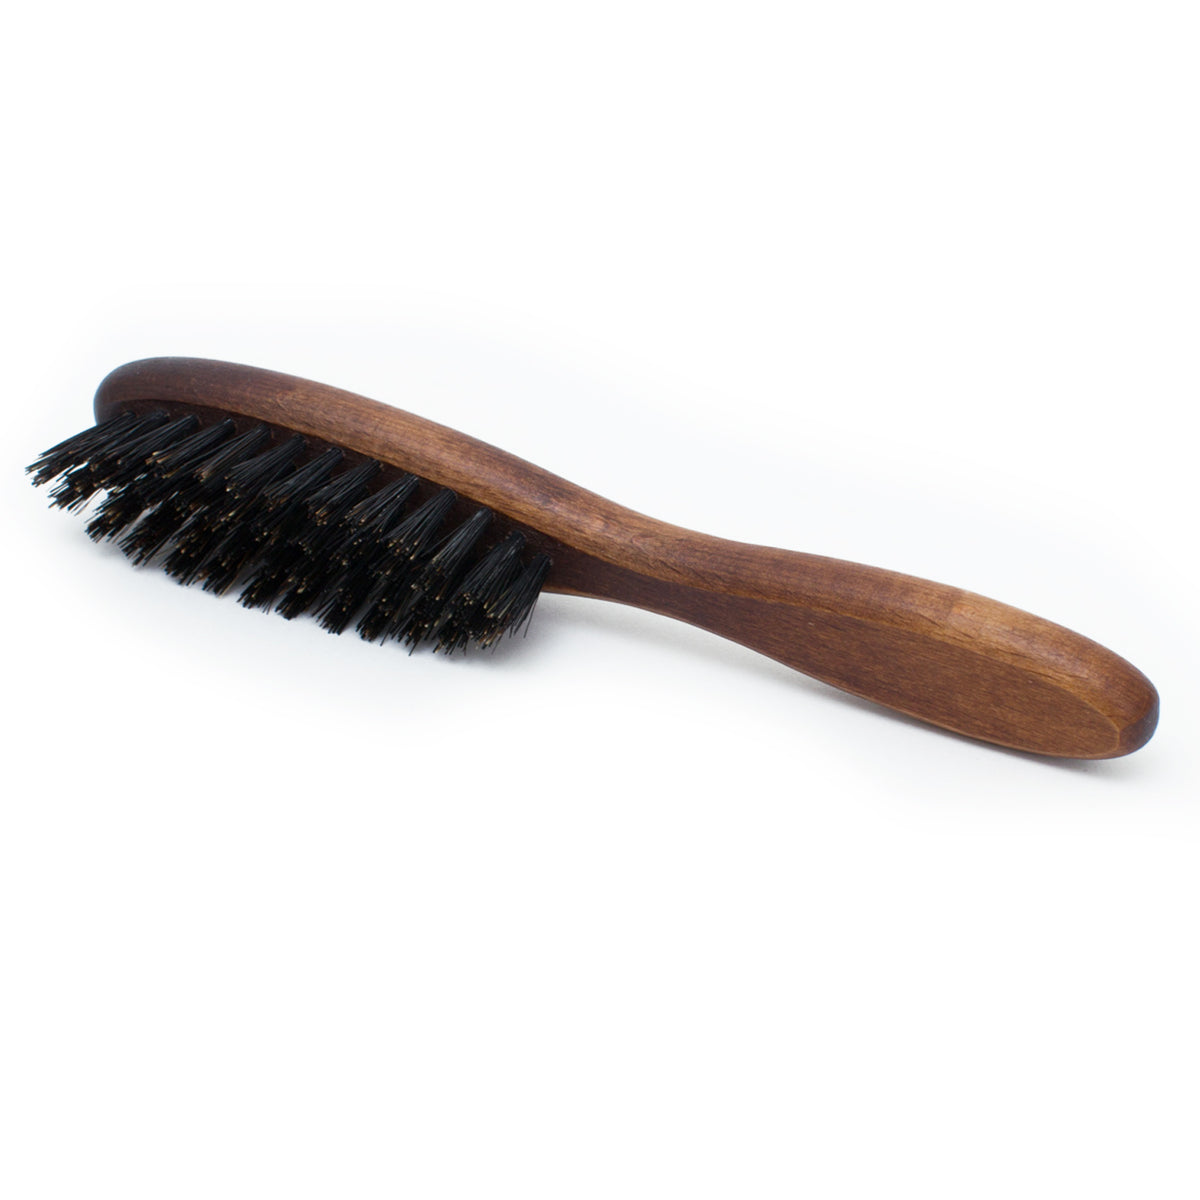 Hanger Project Suede Cleaning Brush